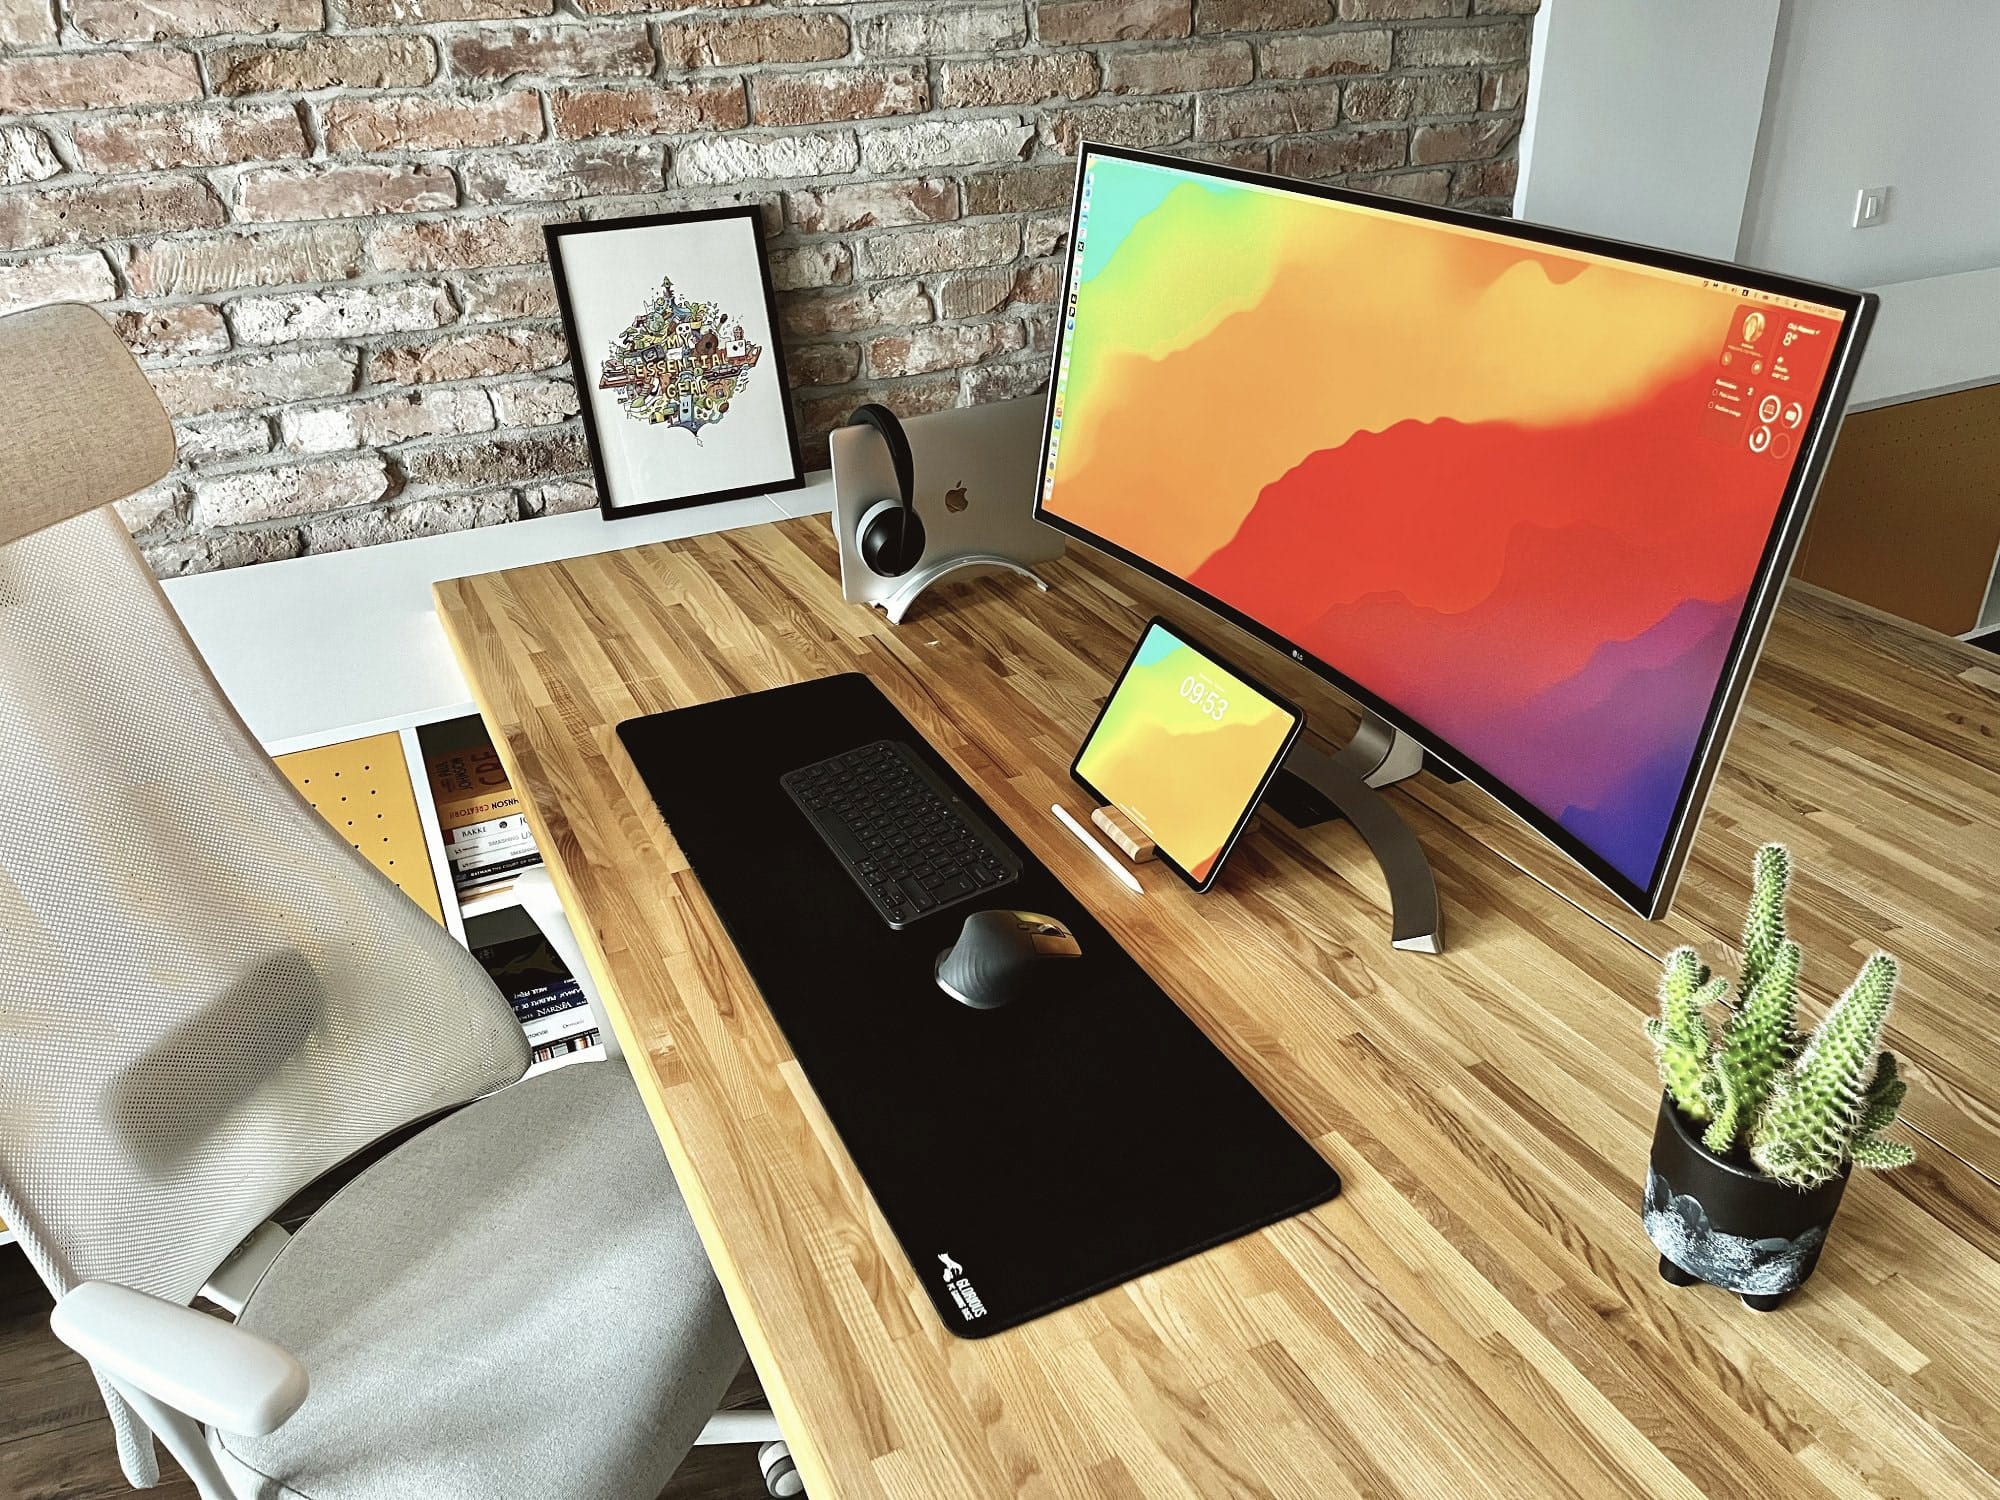 A minimalist home office desk setup with an exposed brick wall